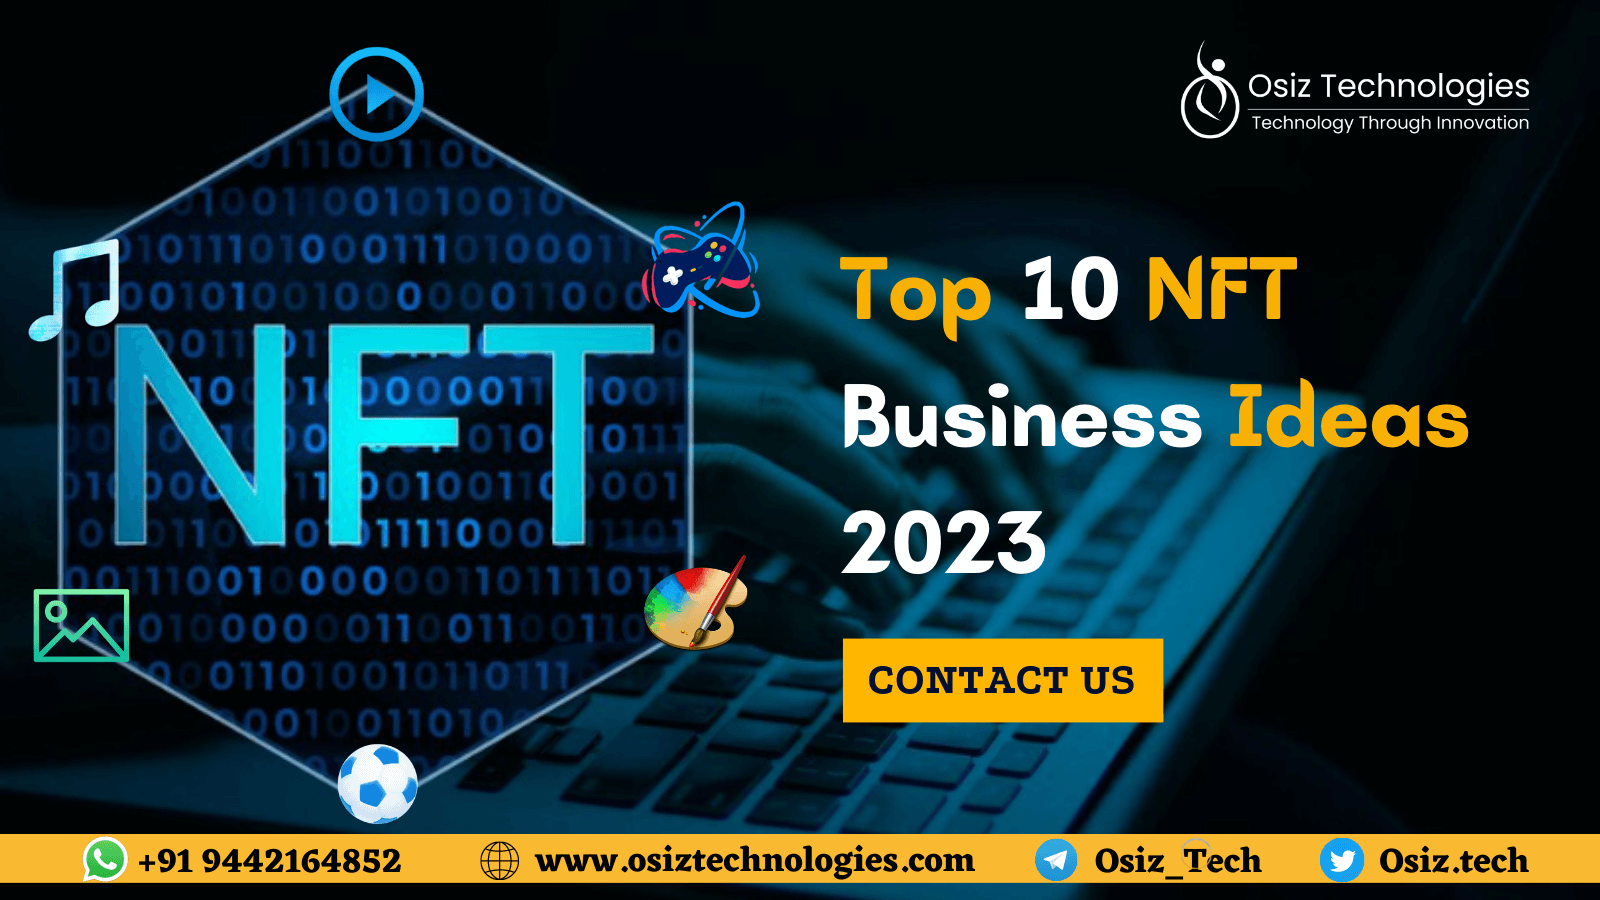 Top 10 NFT business ideas in 2023 -To revamp your business